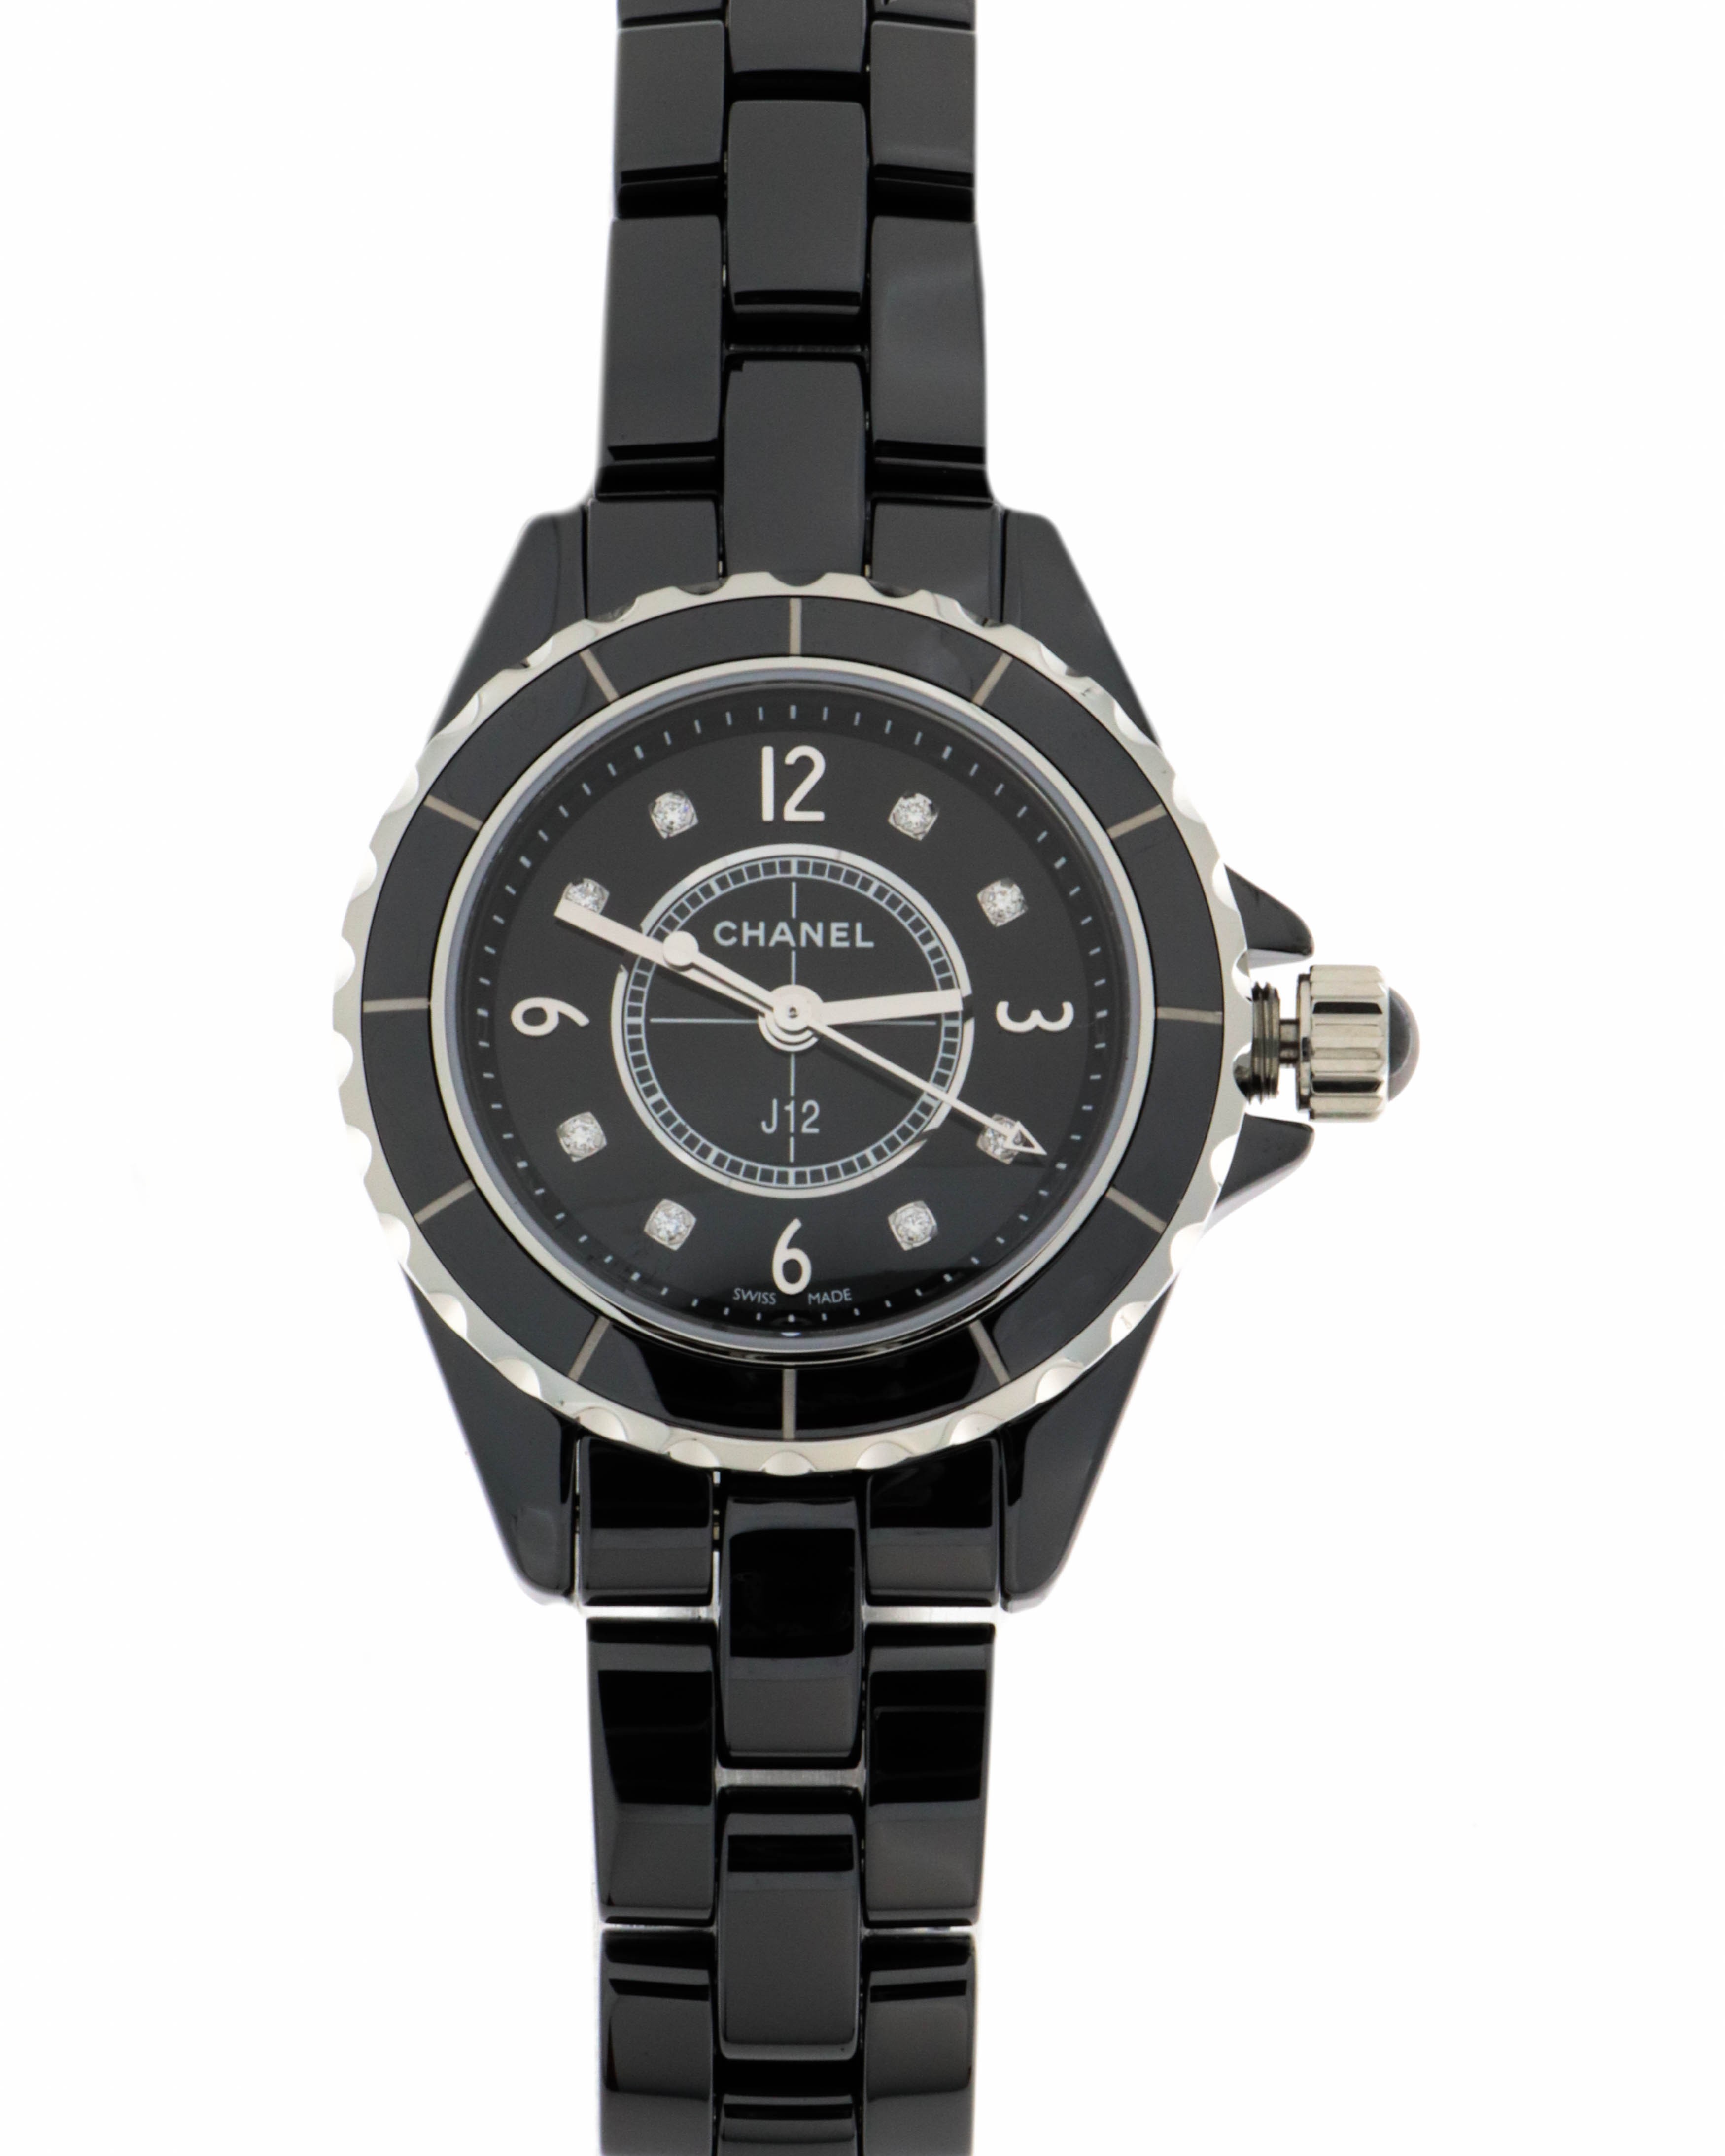 Chanel J12 Chromatic Watch Review 